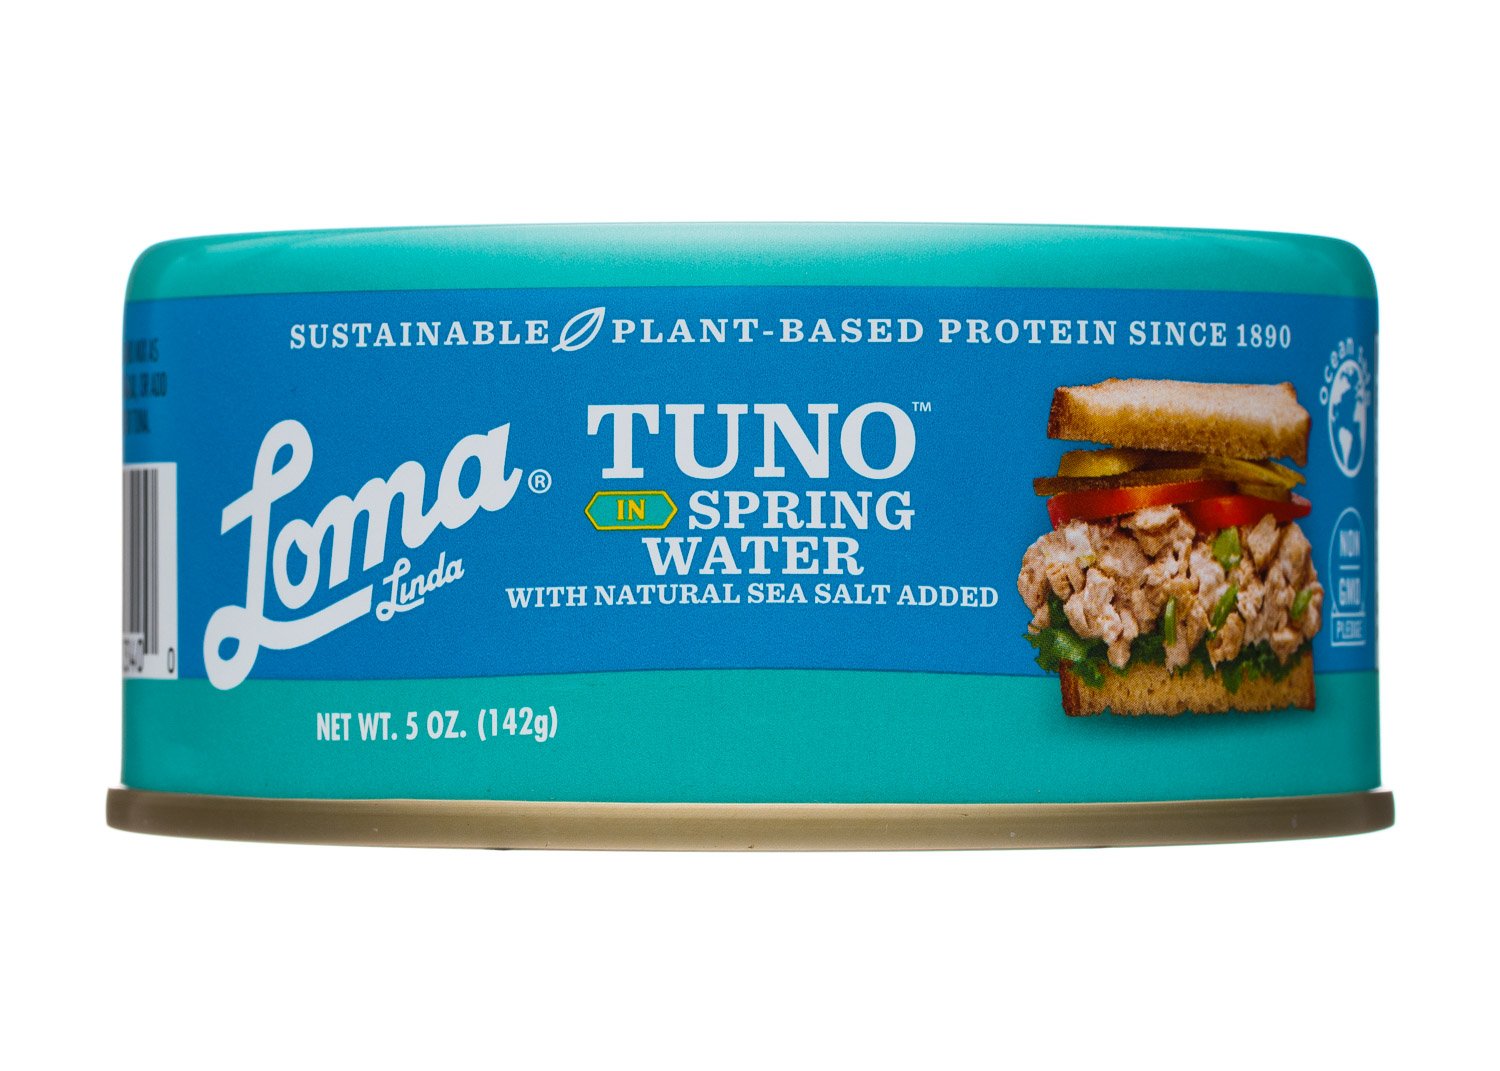 Tuno in Spring Water